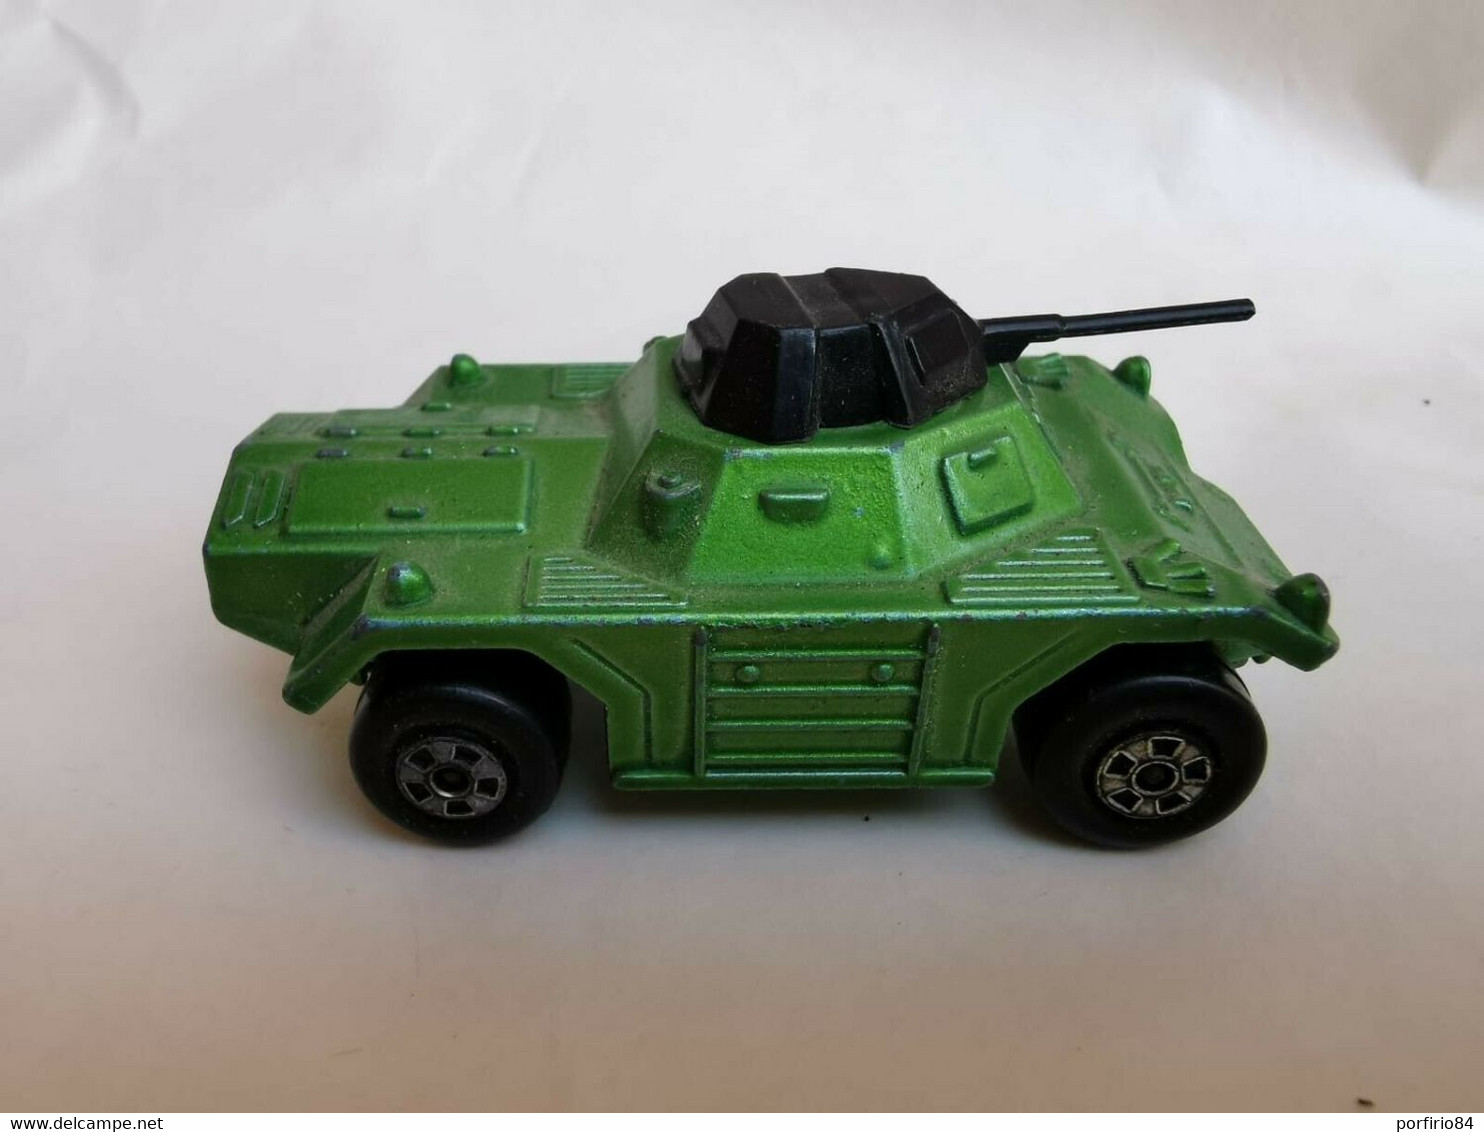 VINTAGE MODELLINO CARRO ARMATO Matchbox 1973 Rola-Matics N.73 WEASEL ARMORED TRUCK   Made In England - Tanks